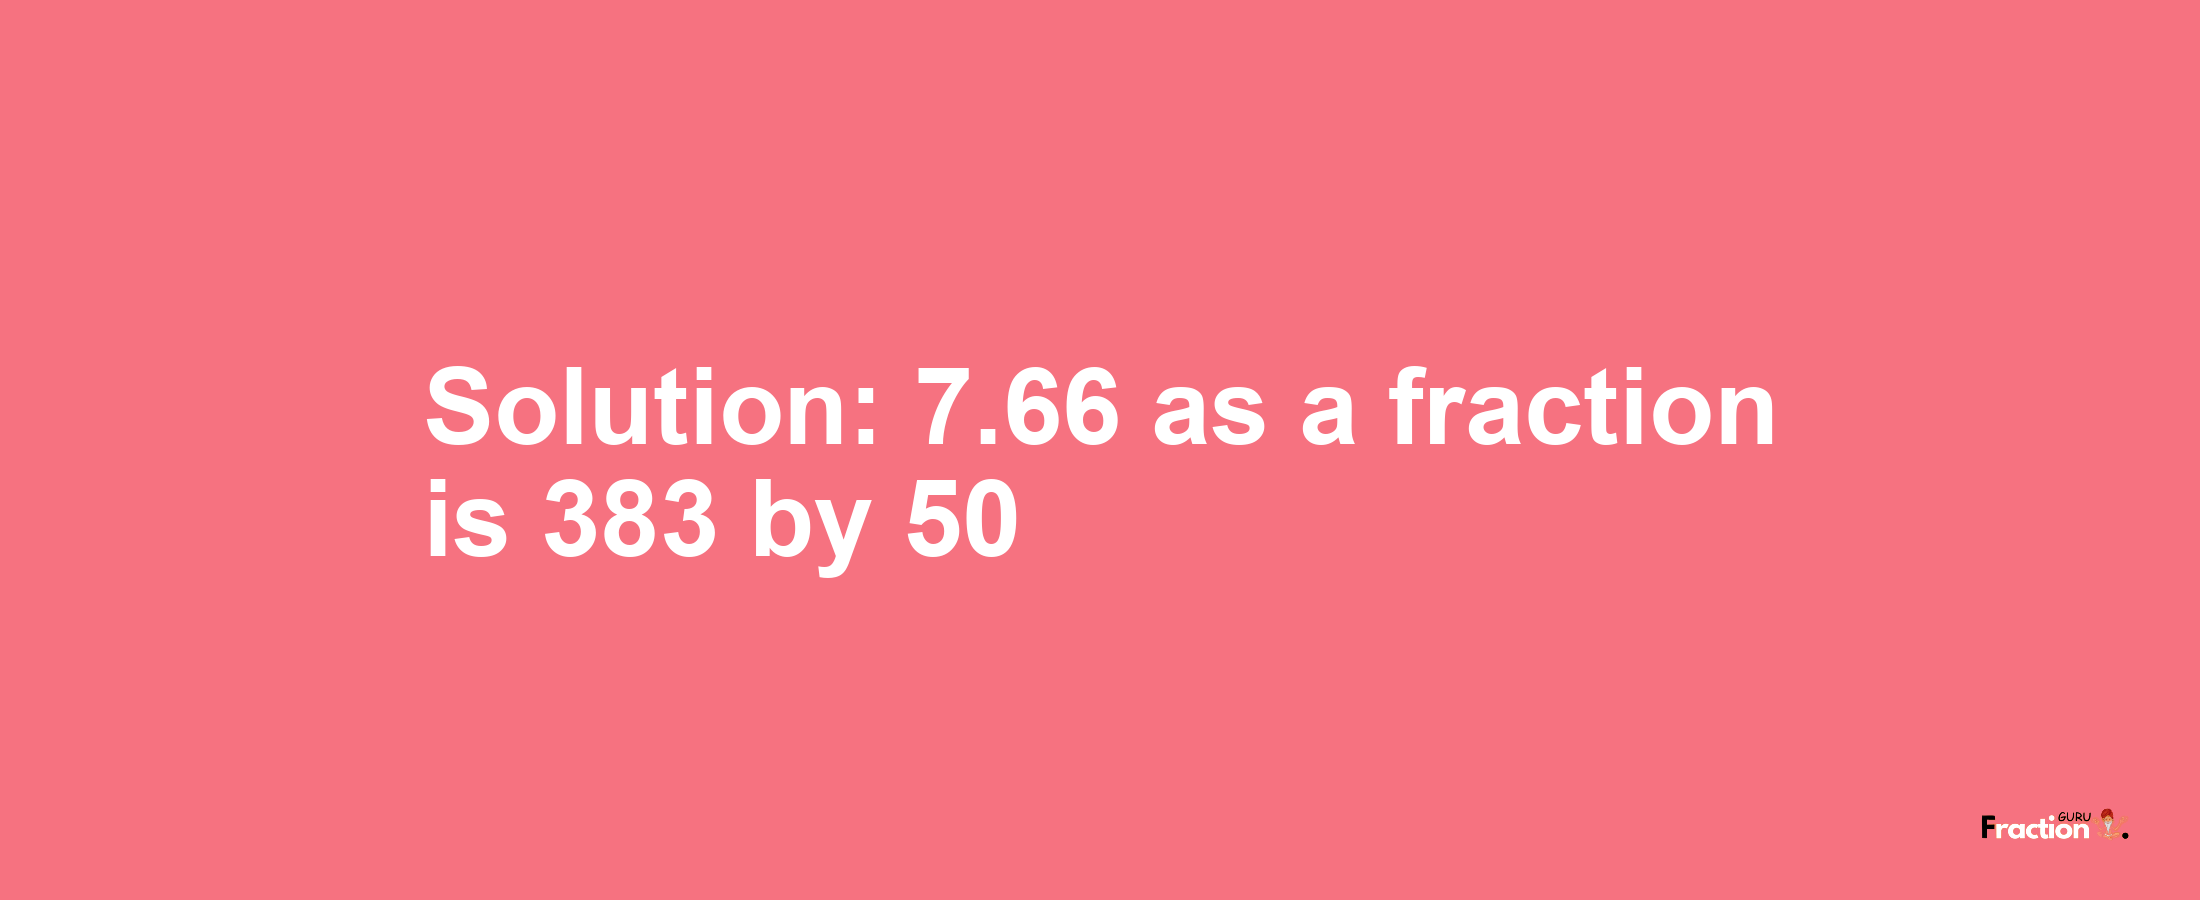 Solution:7.66 as a fraction is 383/50